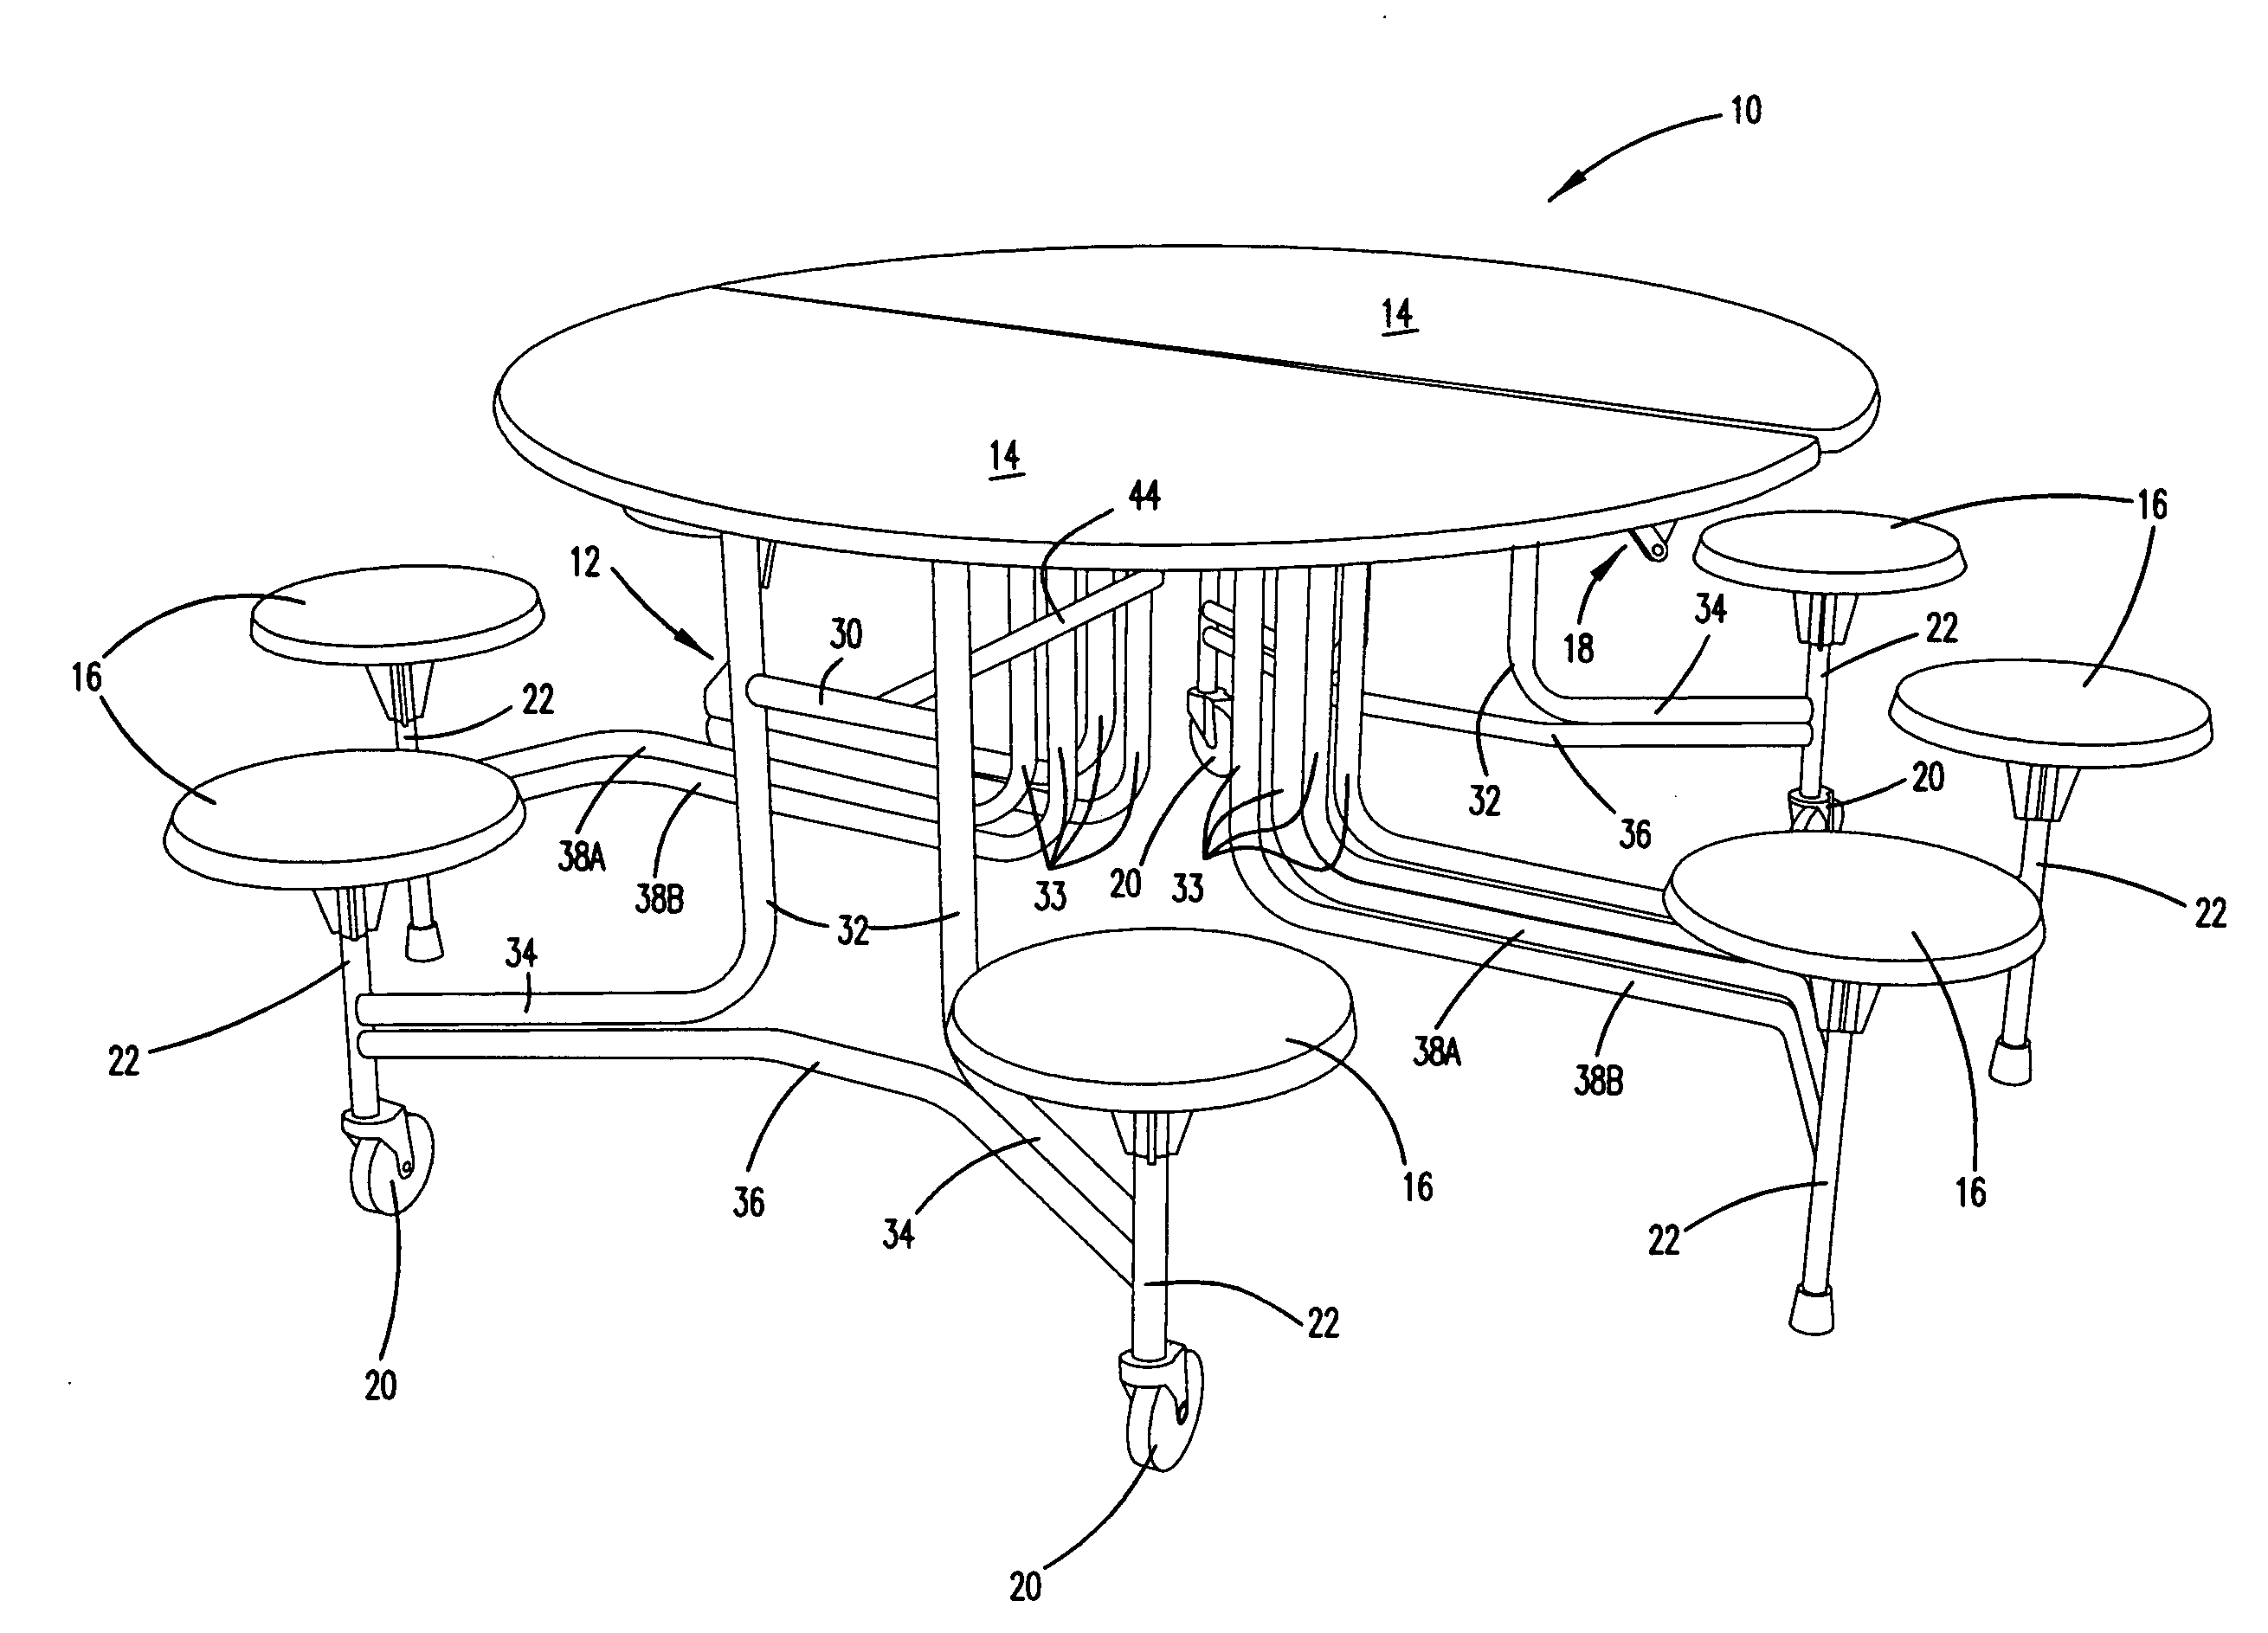 Folding table and seating system